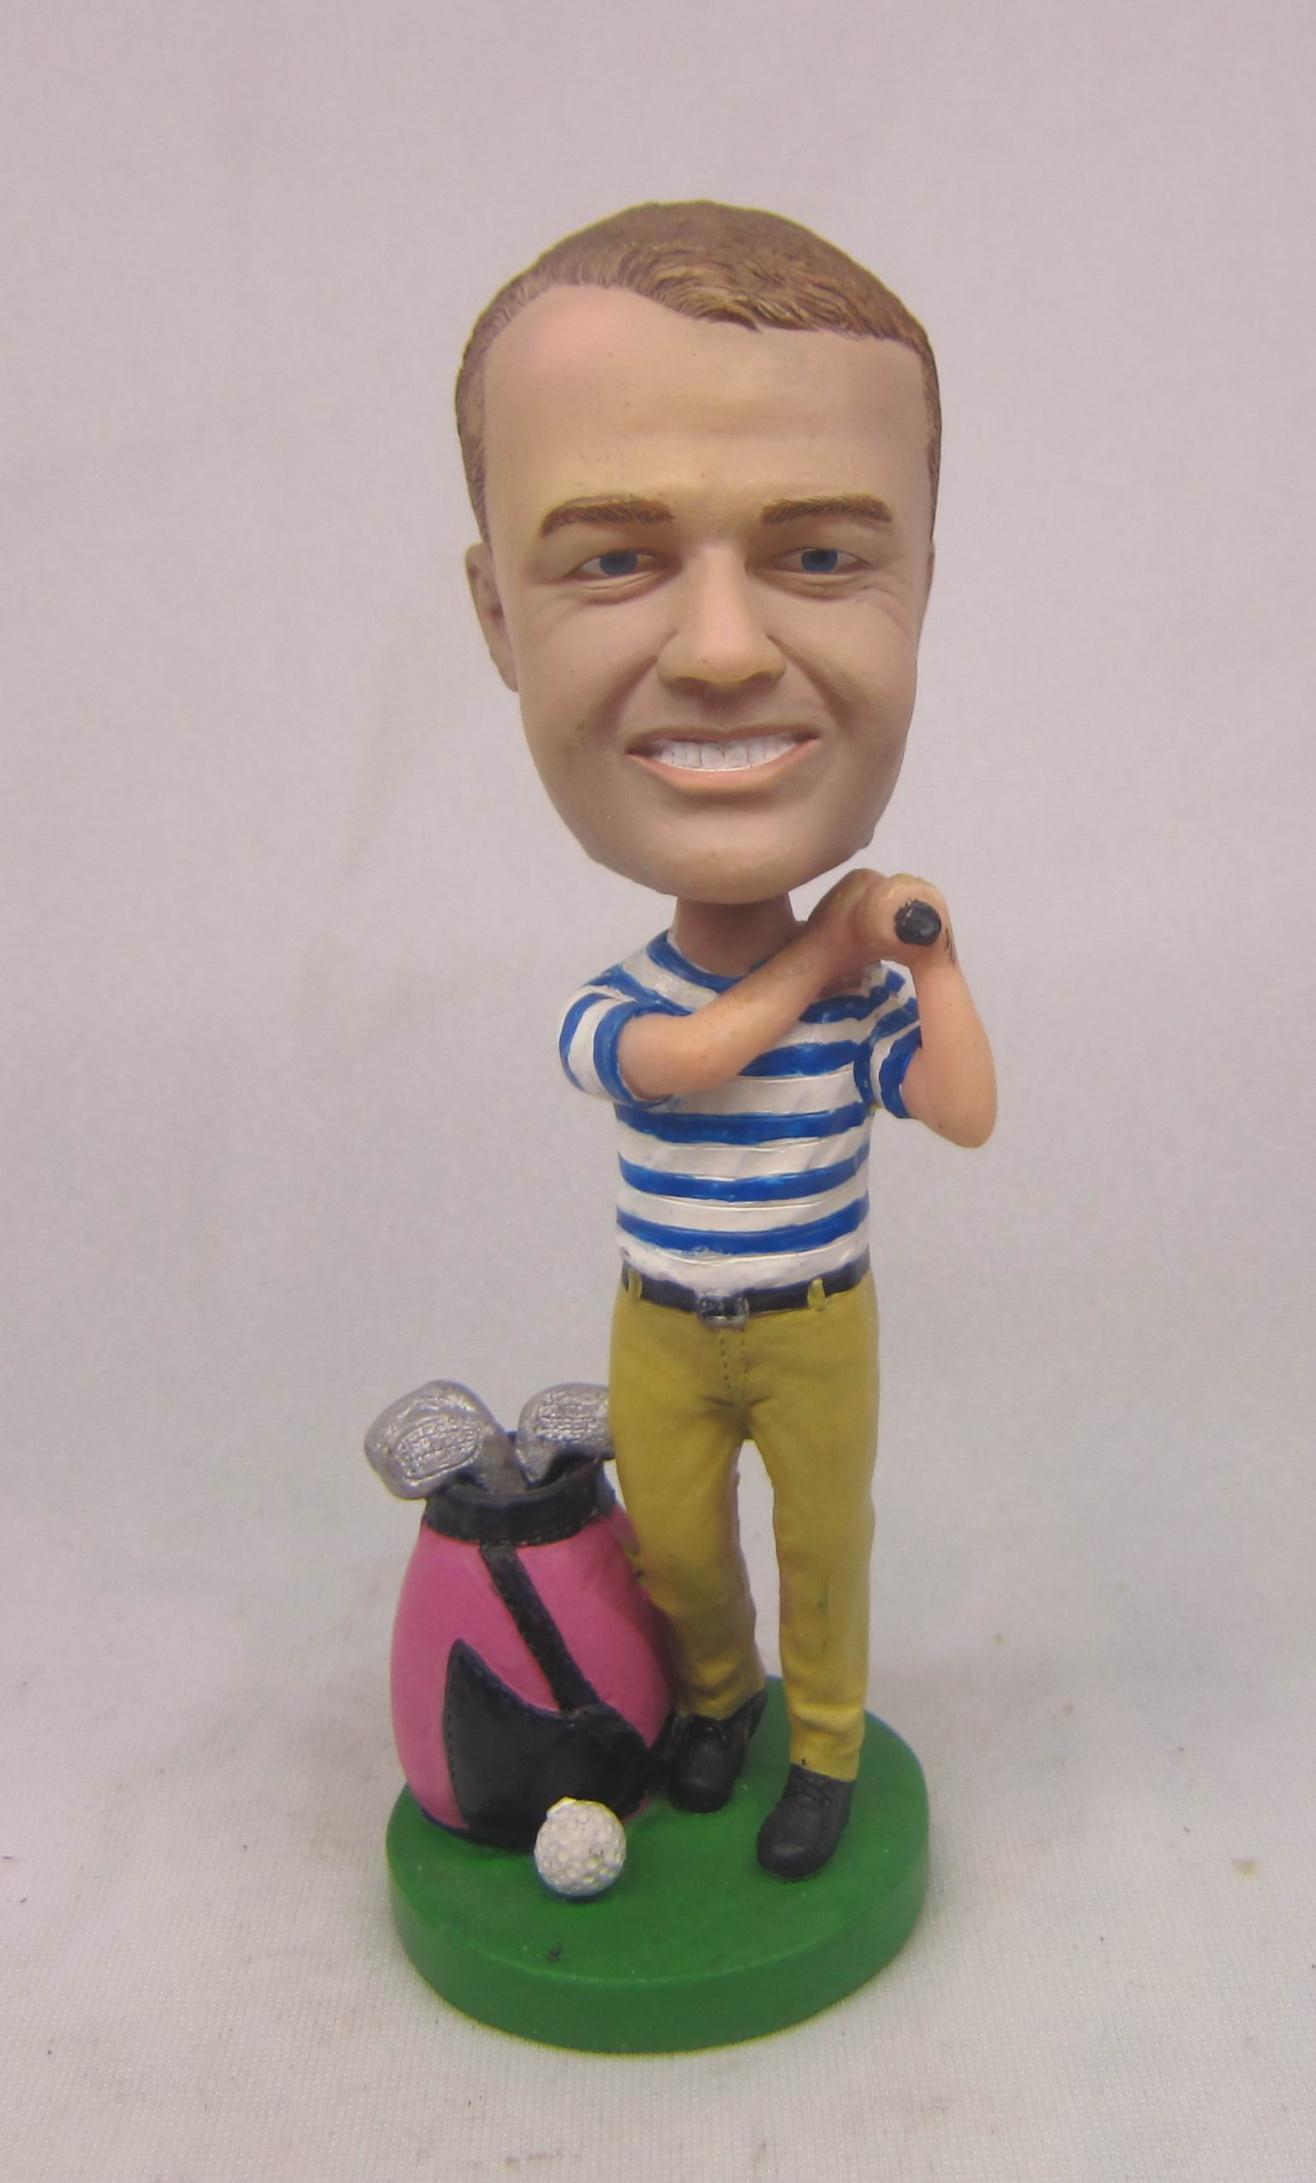  Custom bobbleheads are easily one of the most personalized figurines available in the market today. It embodies all the elements of the perfect gift for friends, loved ones or even yourself.